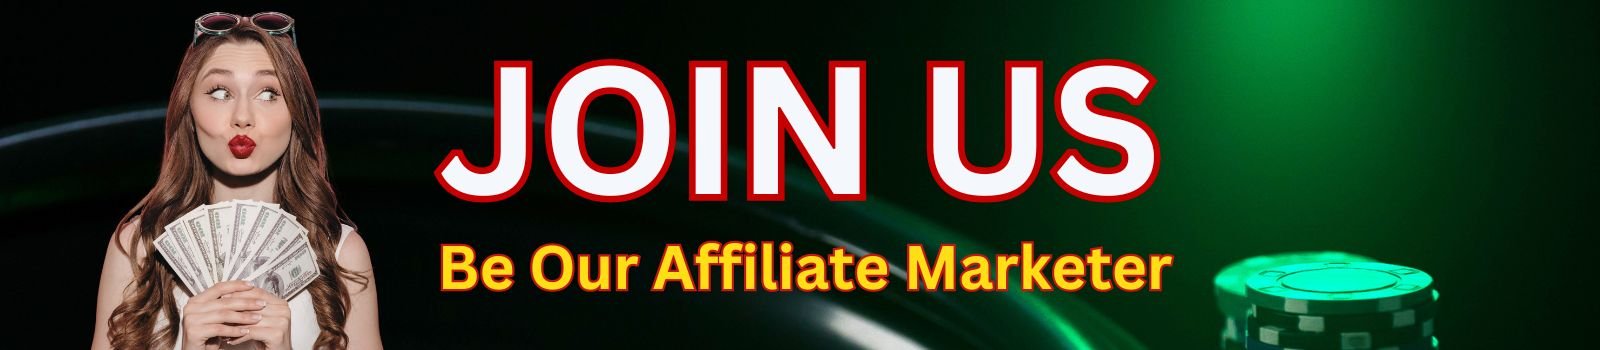 Be Our Affiliate Marketer